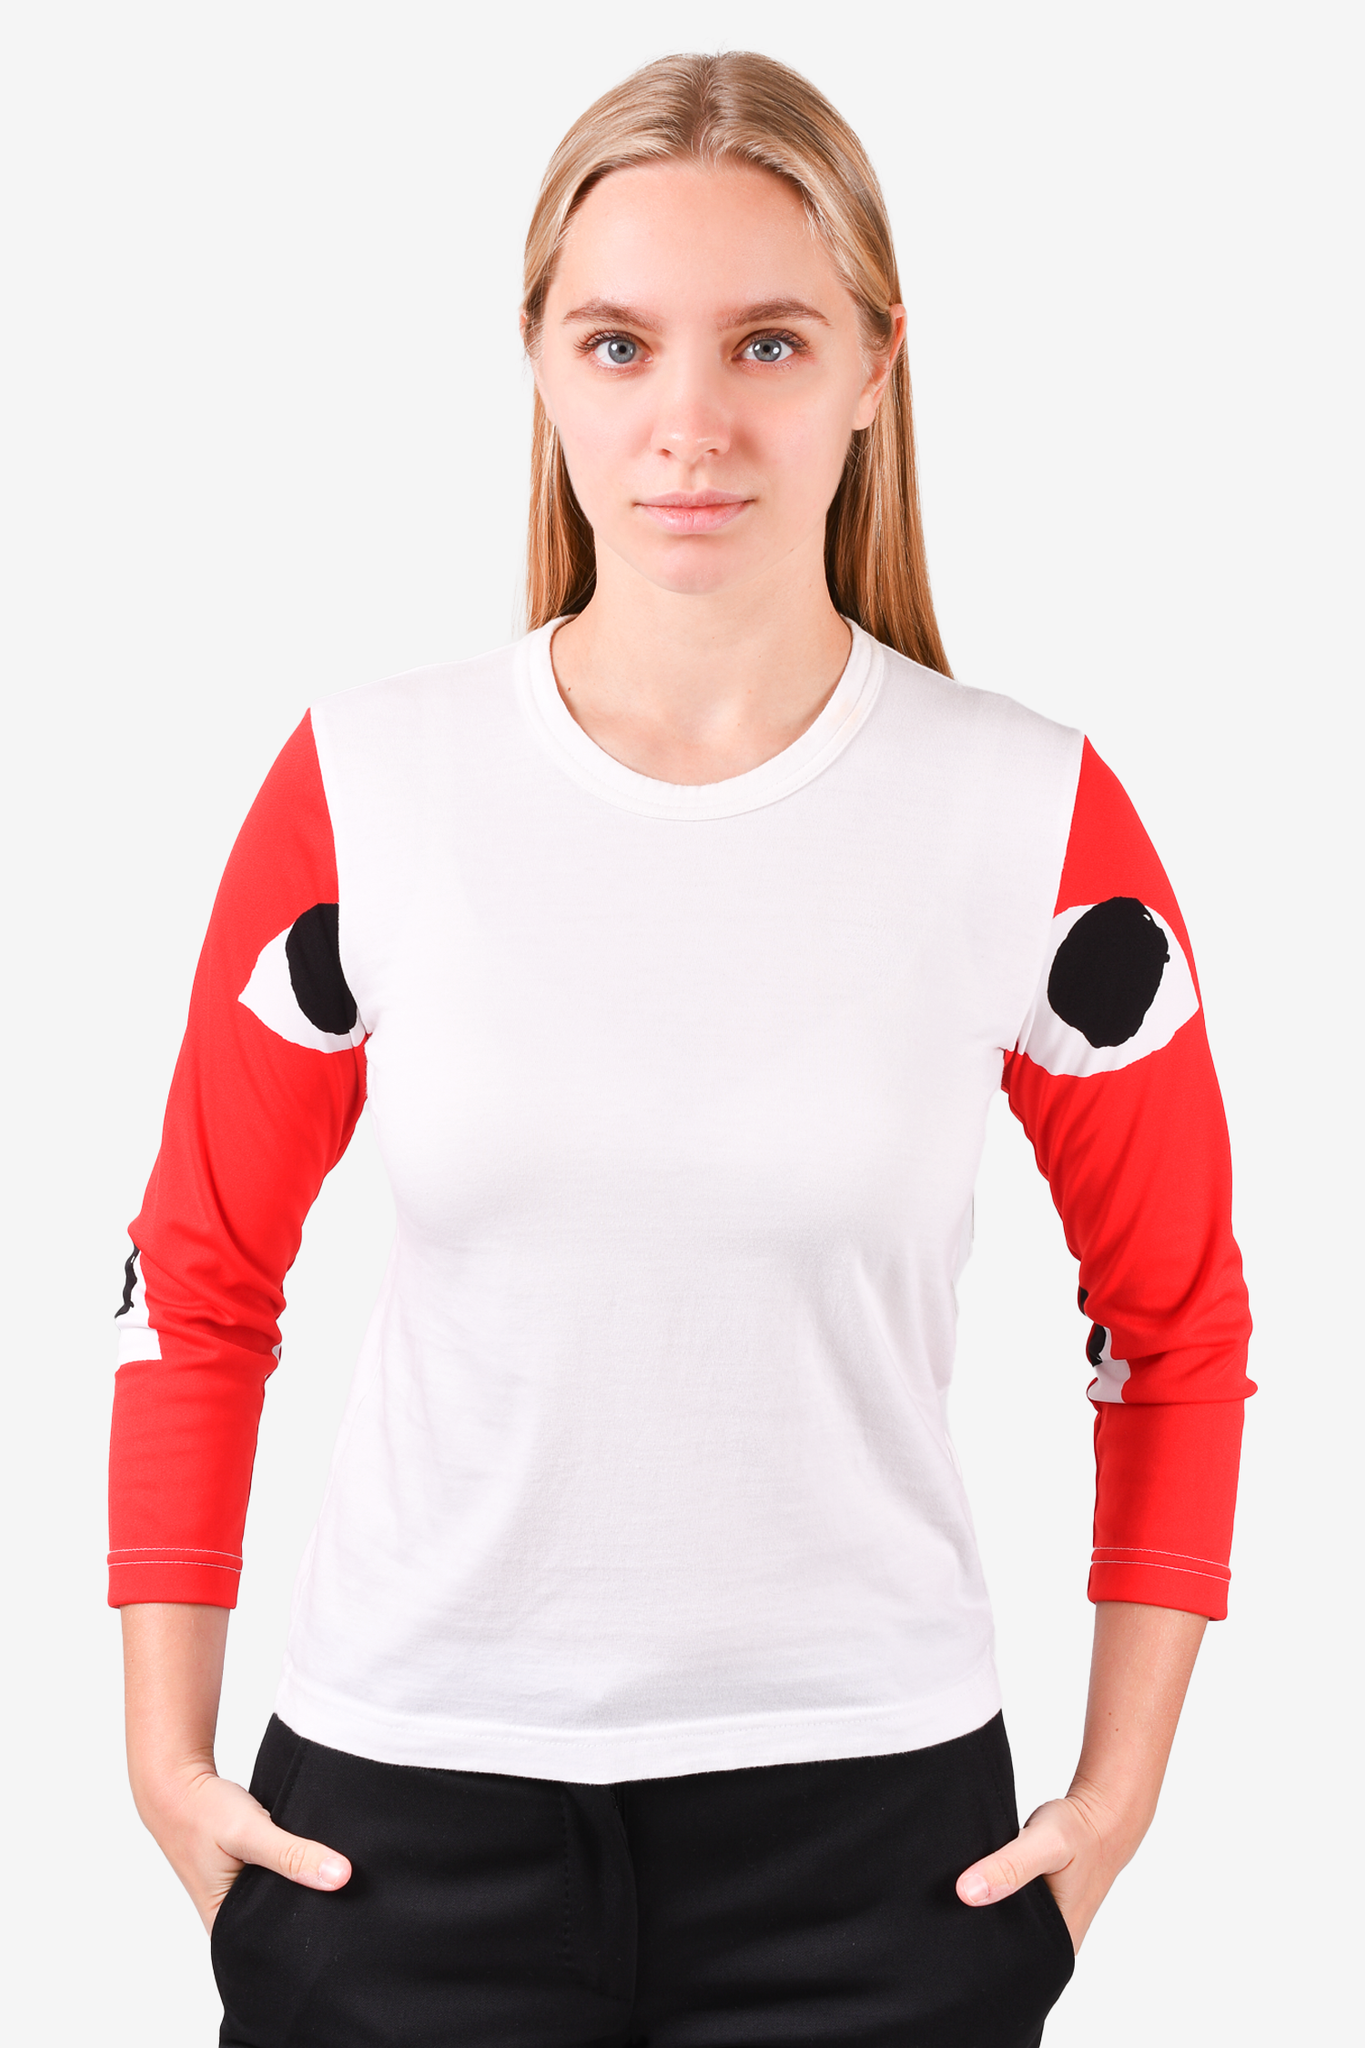 Comme des Garcons White/Red Top Size XS